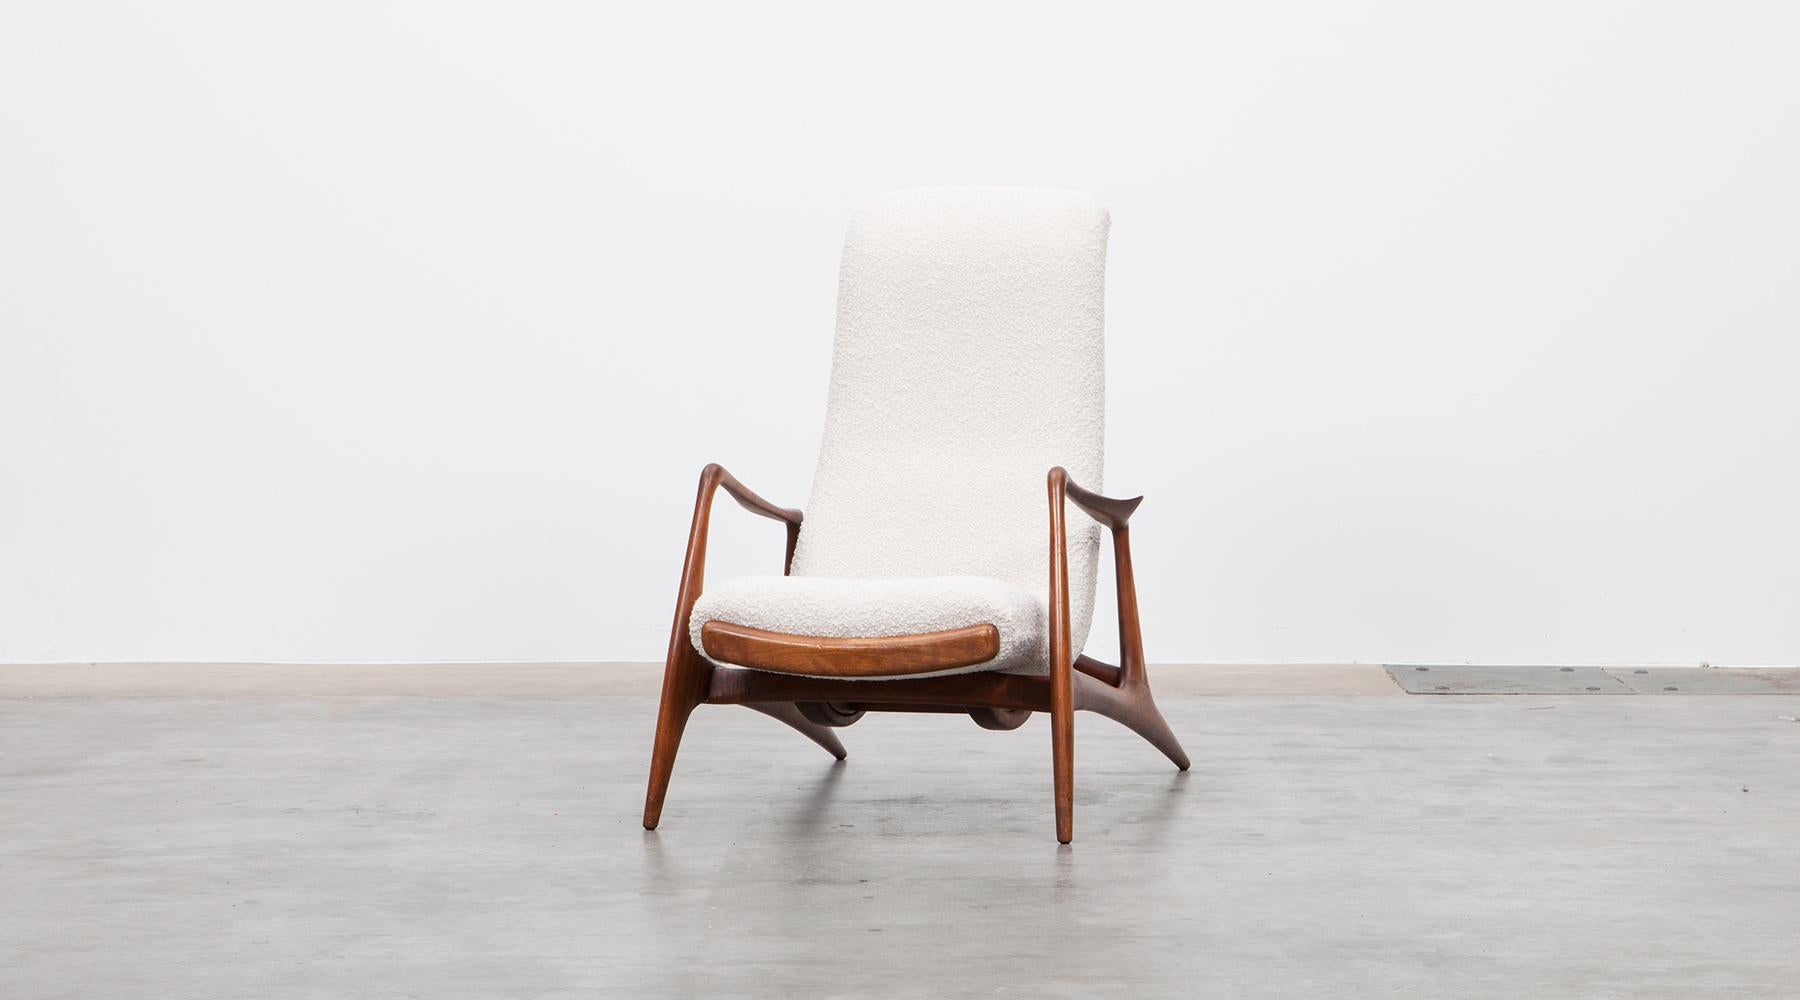 1950s Teak and White Upholstery Lounge Chair by Vladimir Kagan 1